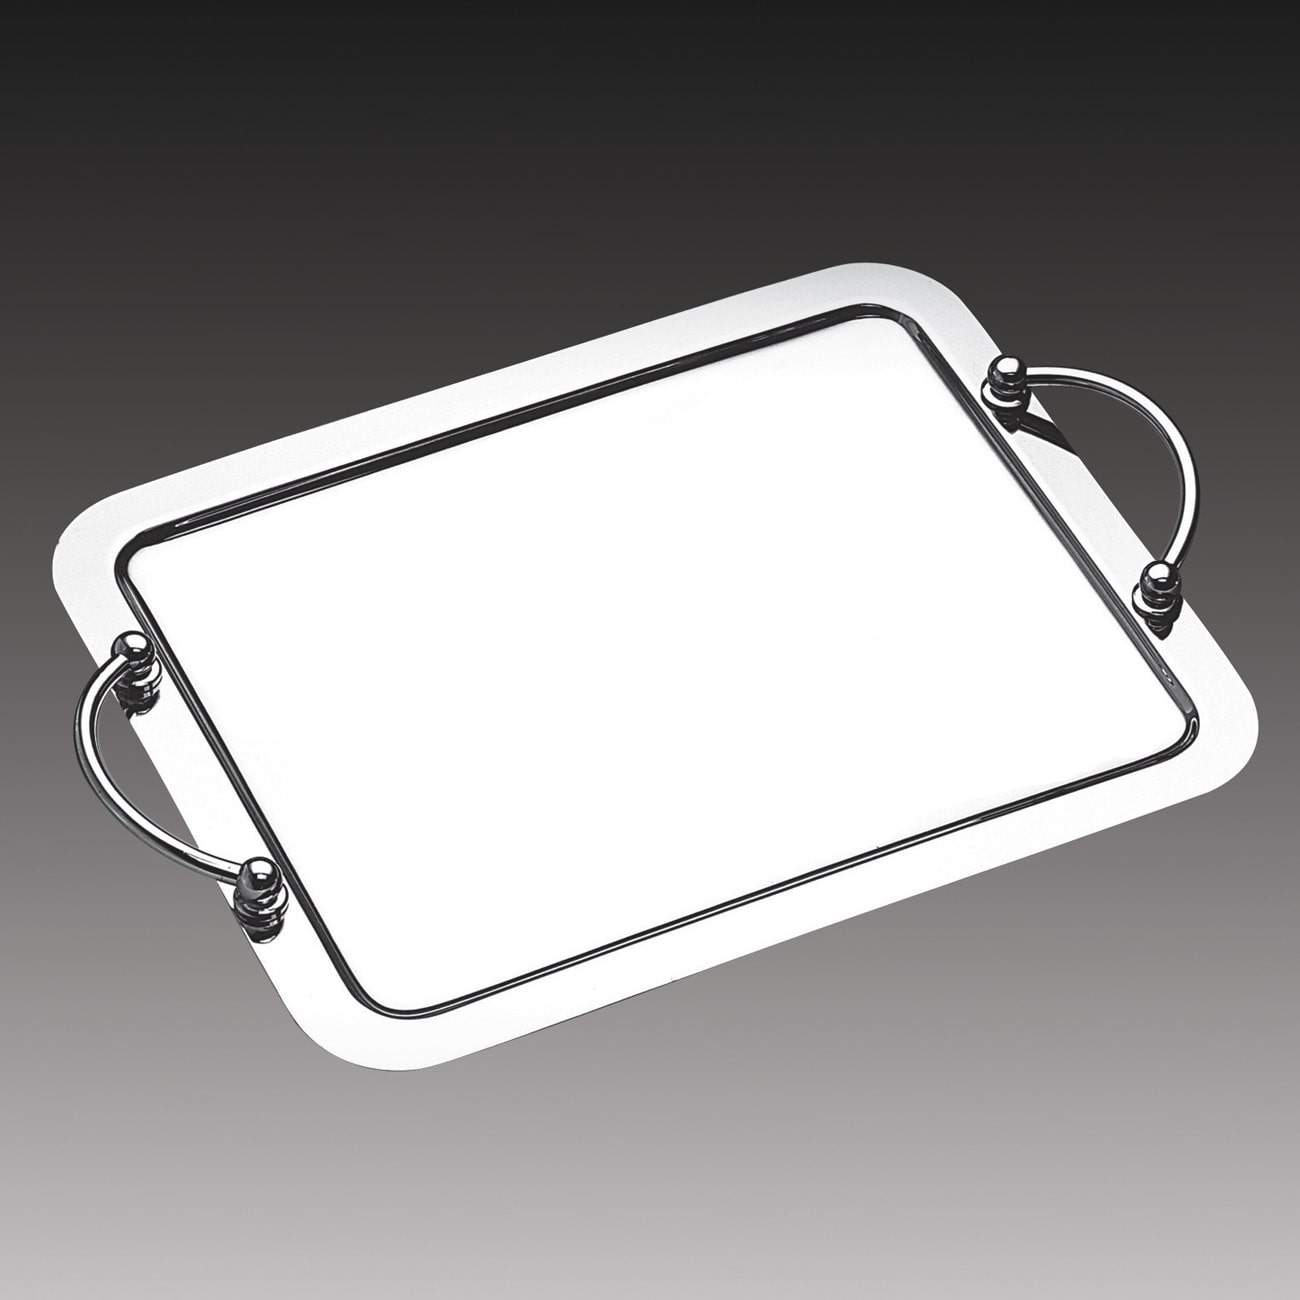 Wolff Ball Silvertone Stainless Steel 9.1-inch x 7.5-inch Large Serving Tray with Handles